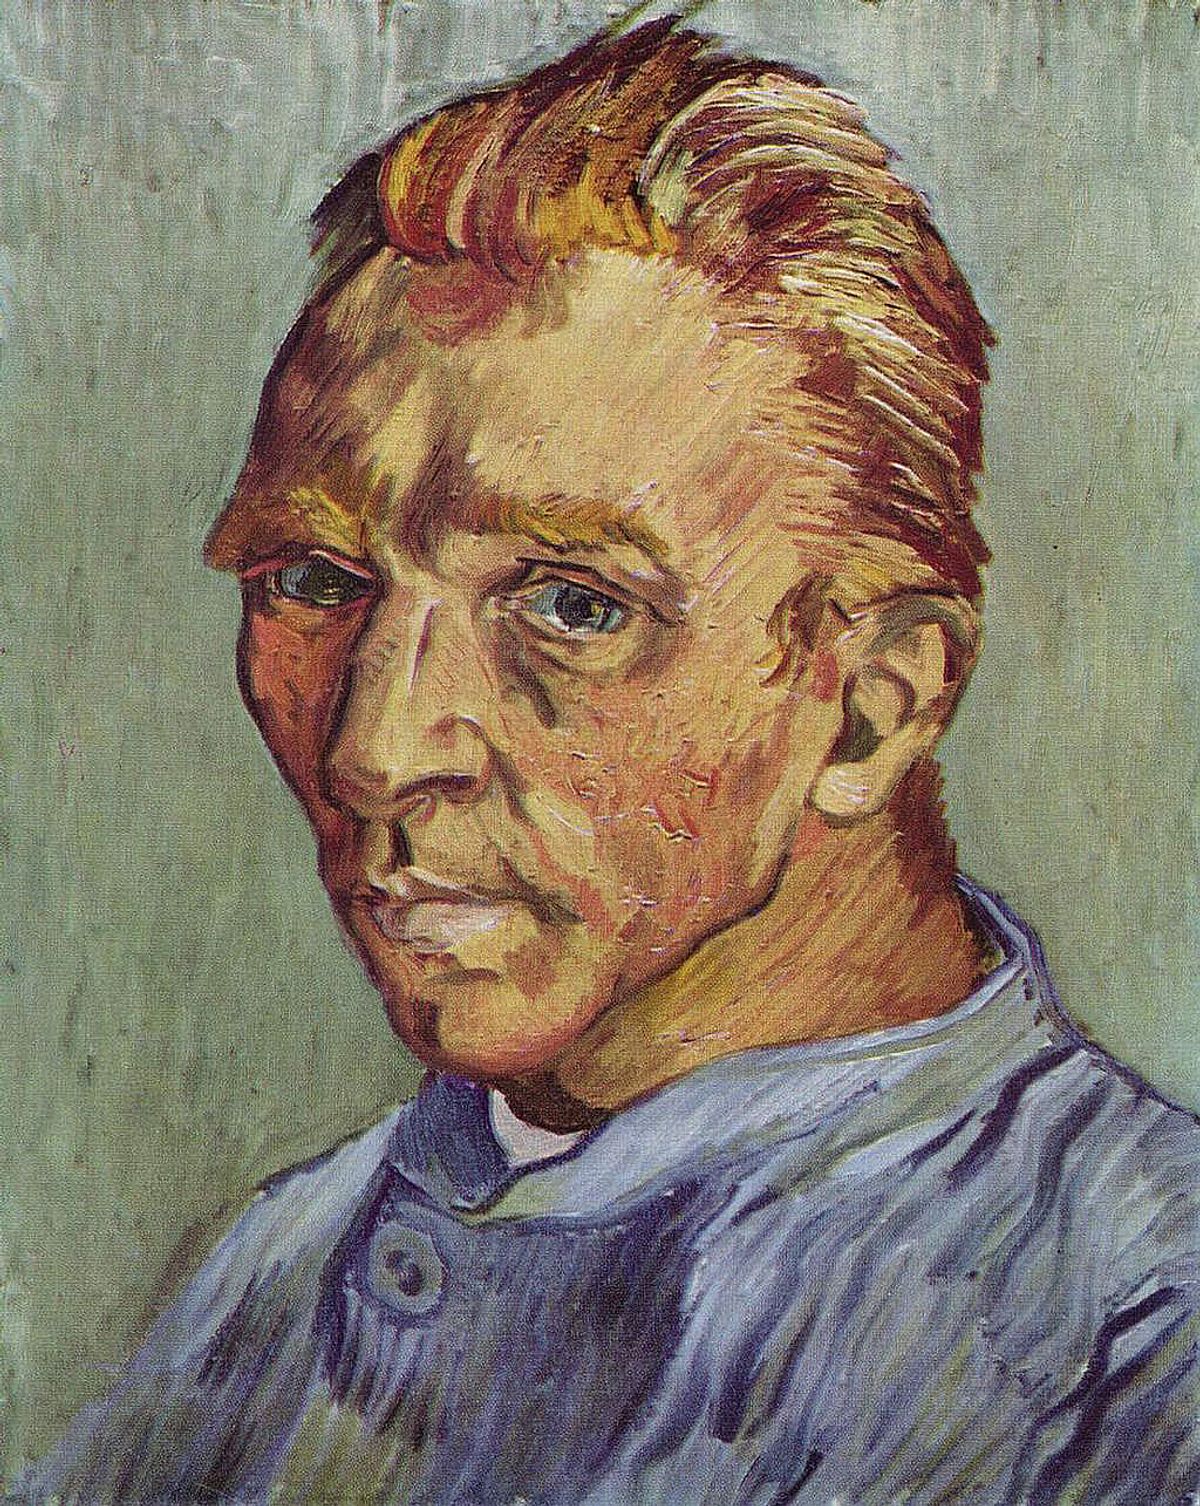 Van Gogh’s Portrait de l’artiste sans barbe (1889) sells for $71.5m in 1997 at Christie’s, New York, becoming the third most expensive painting ever sold at auction 